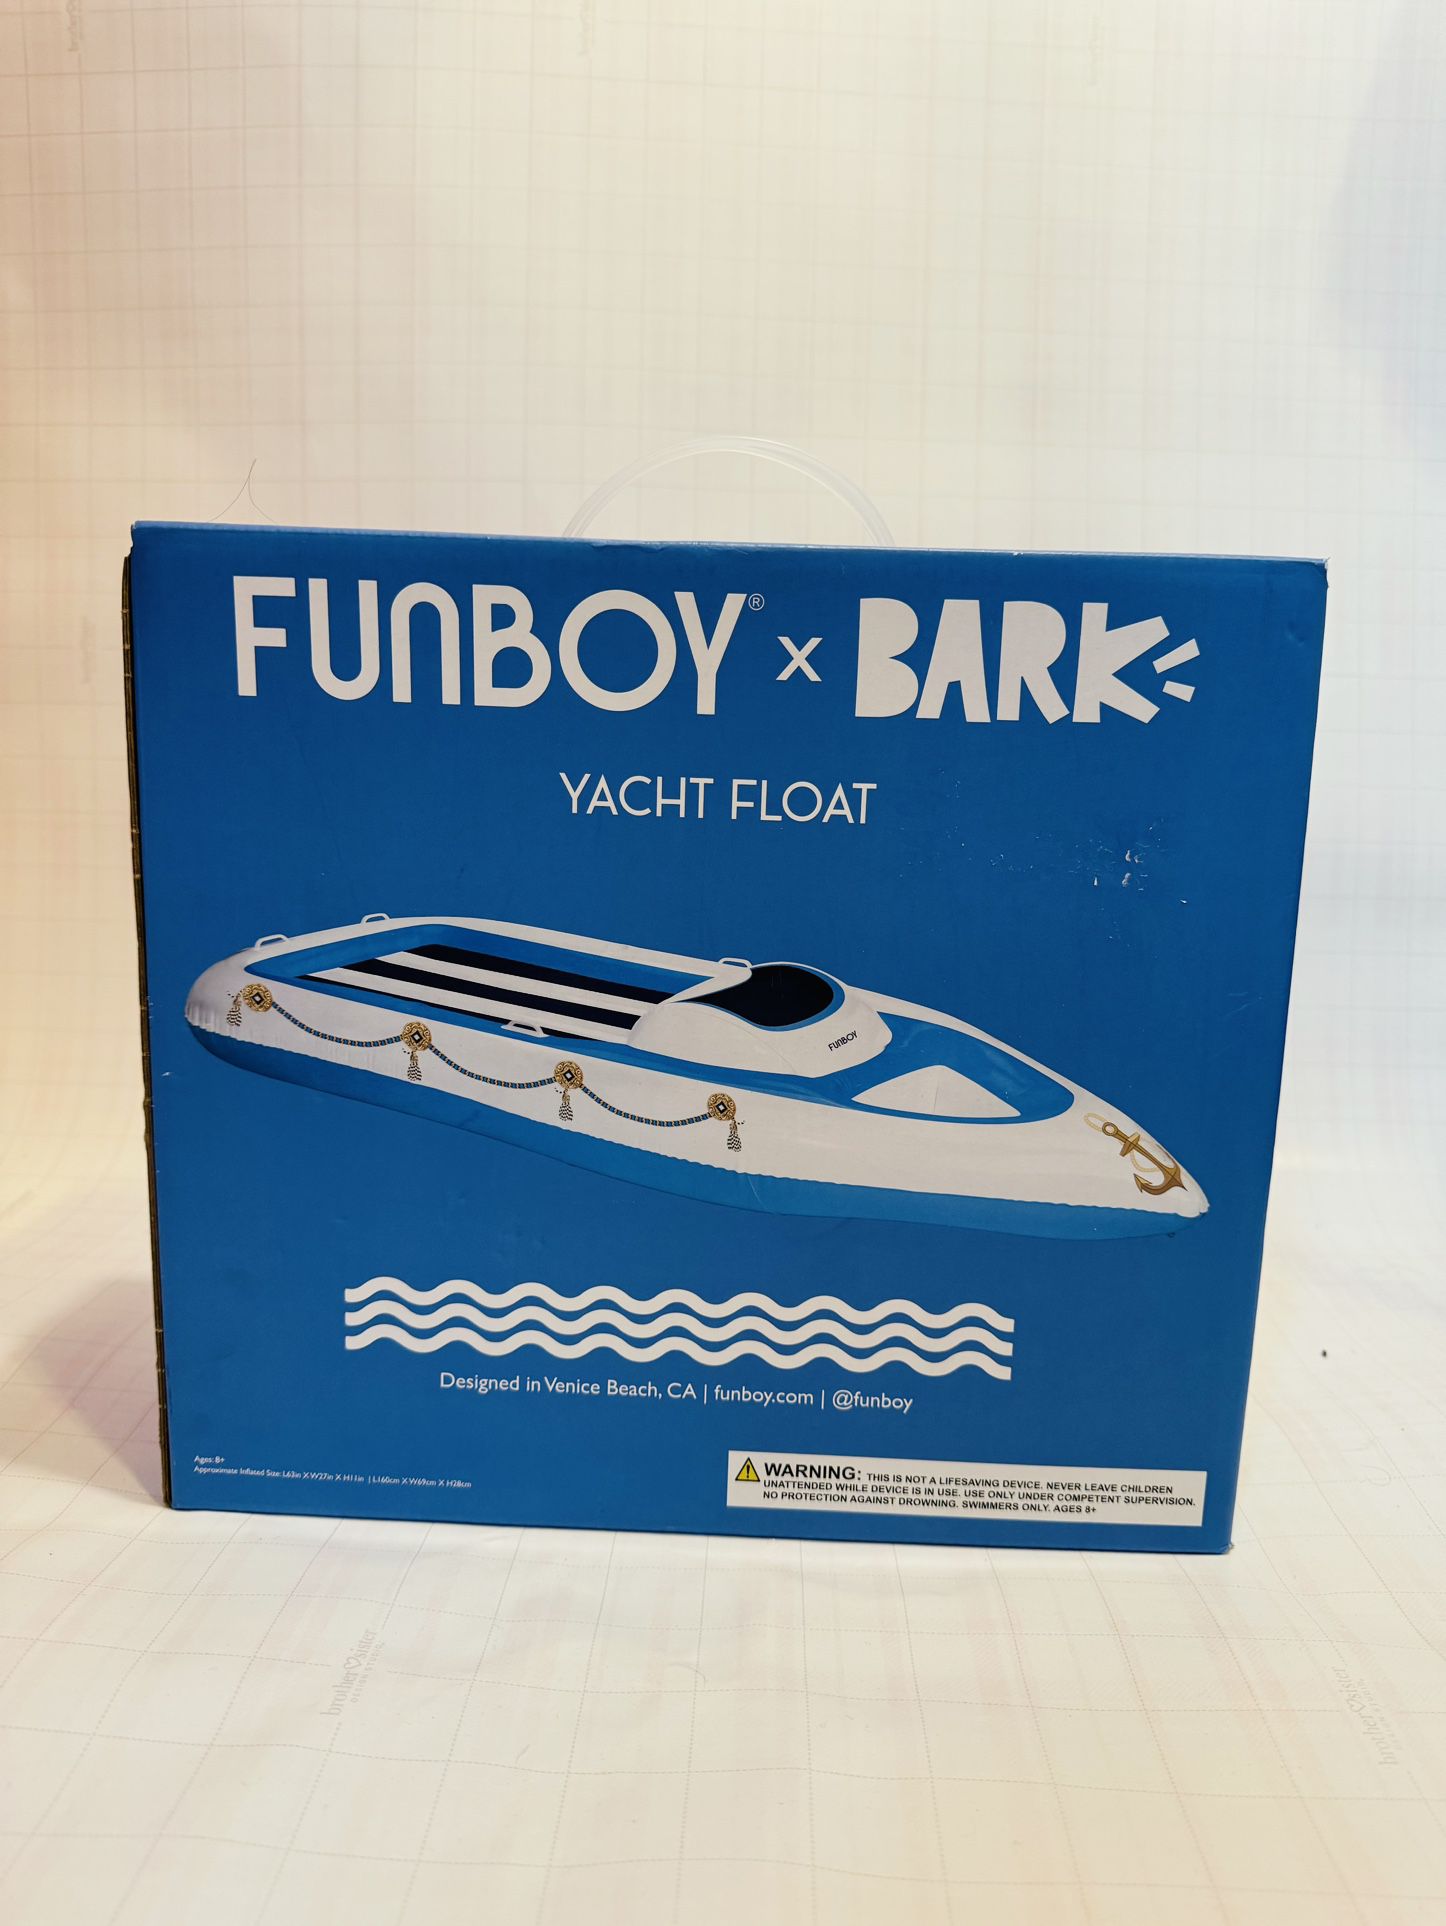 Inflatable Funboy X Bark Yacht Boat Float Pool Raft Beach Ride On NEW In Box 63”